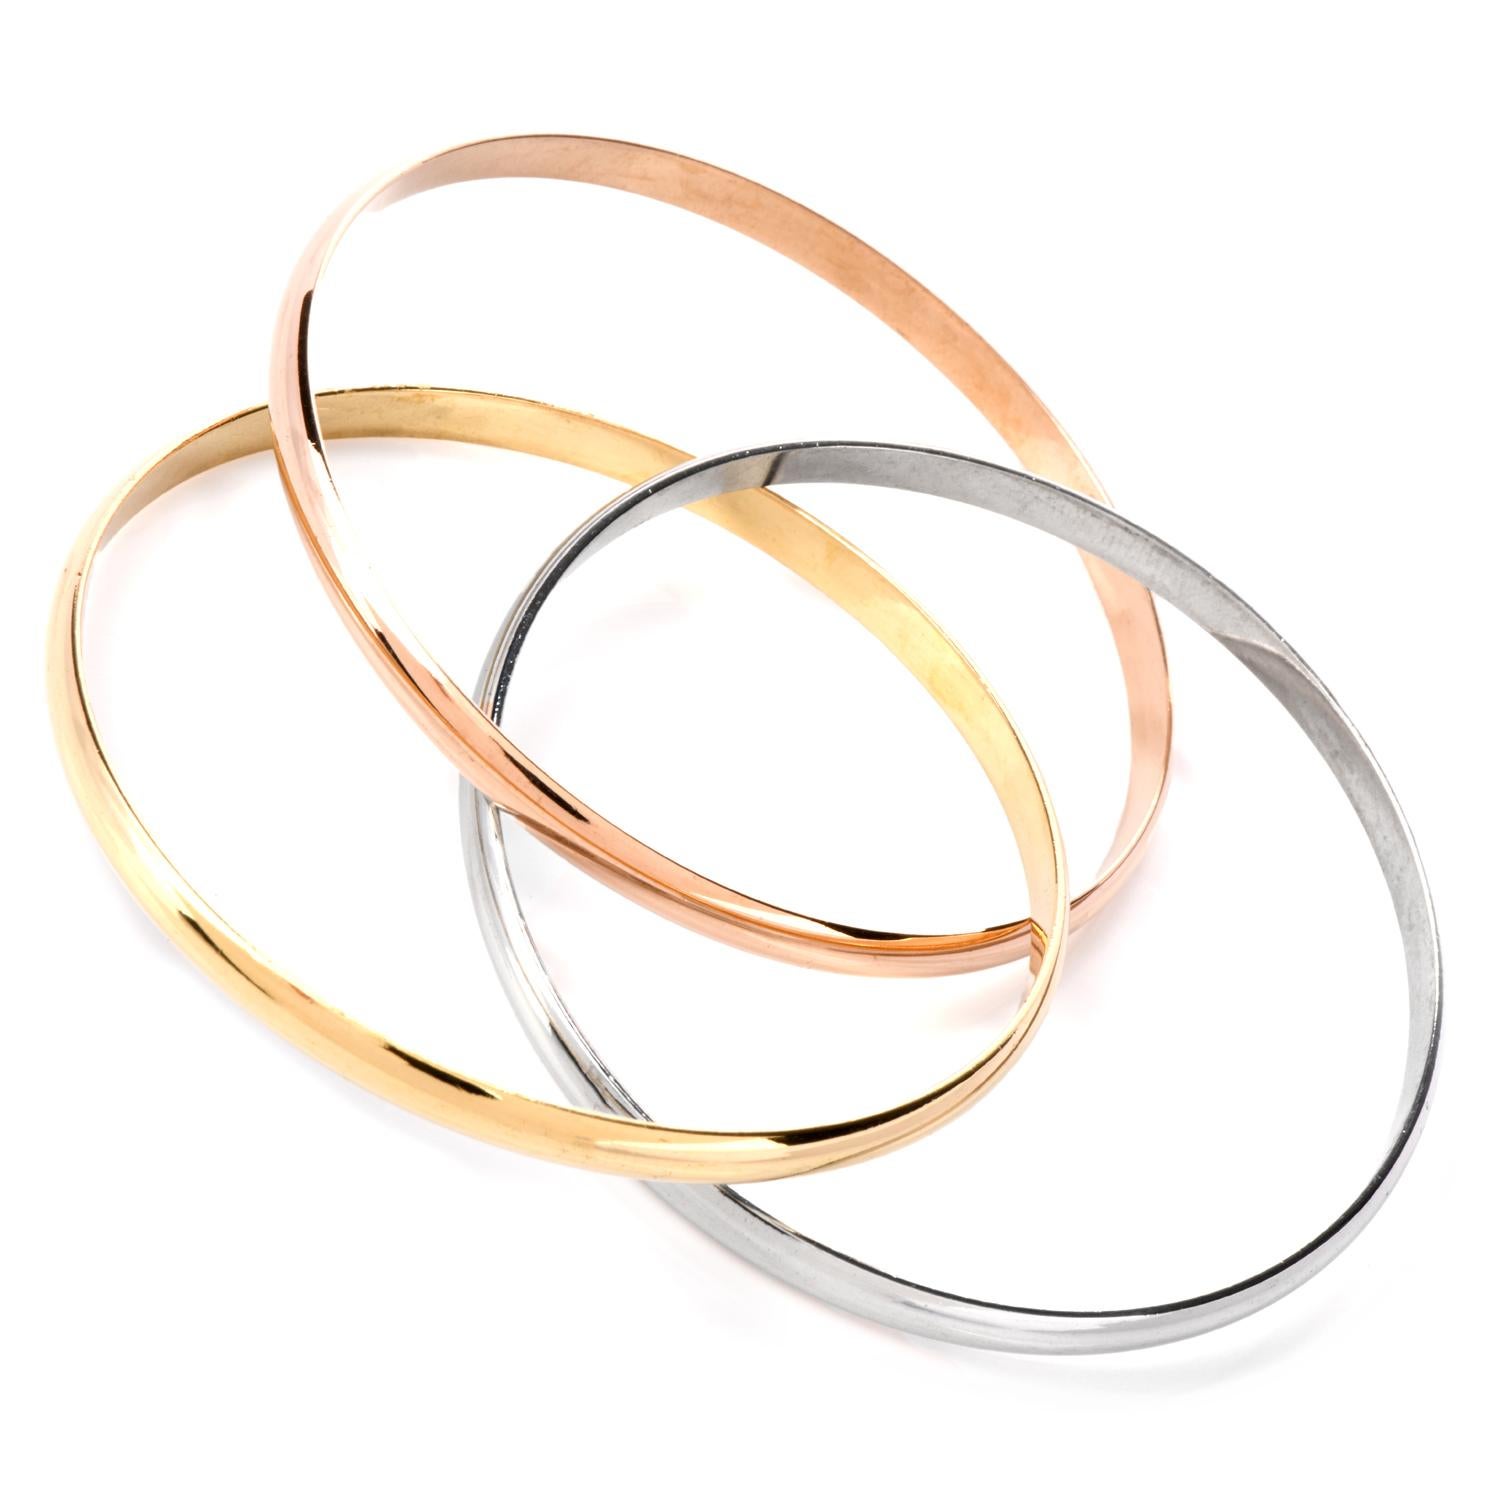 Mix and Match your entire jewelry wardrobe while

wearing and enjoying this beatiful Catier multi-bangle bracelet

cast in 18K rose, yellow and white gold.

Each interlocking bracelet has been high polished to accent

the color.

Weighing appx. 60.1